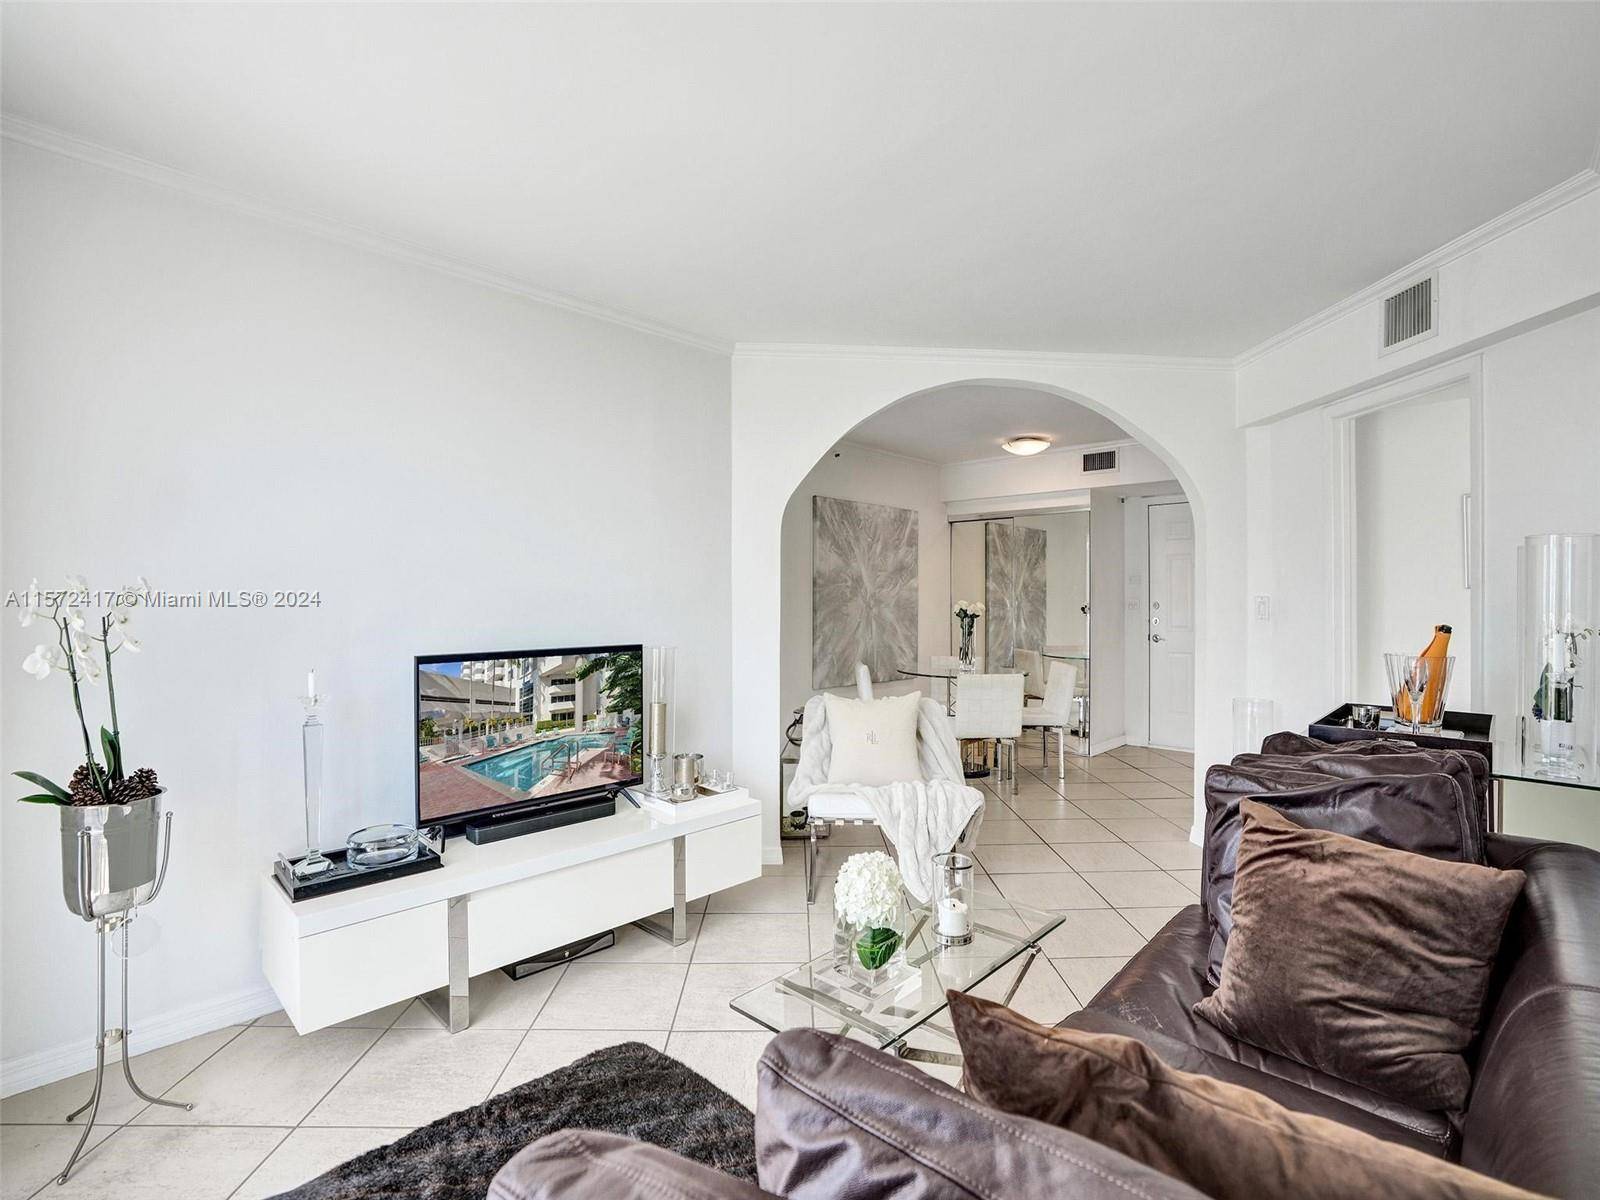 Welcome to your fully furnished 2 bedroom, 2 full bath unit in the heart of South Beach, offering a split floor plan and tile floors throughout.